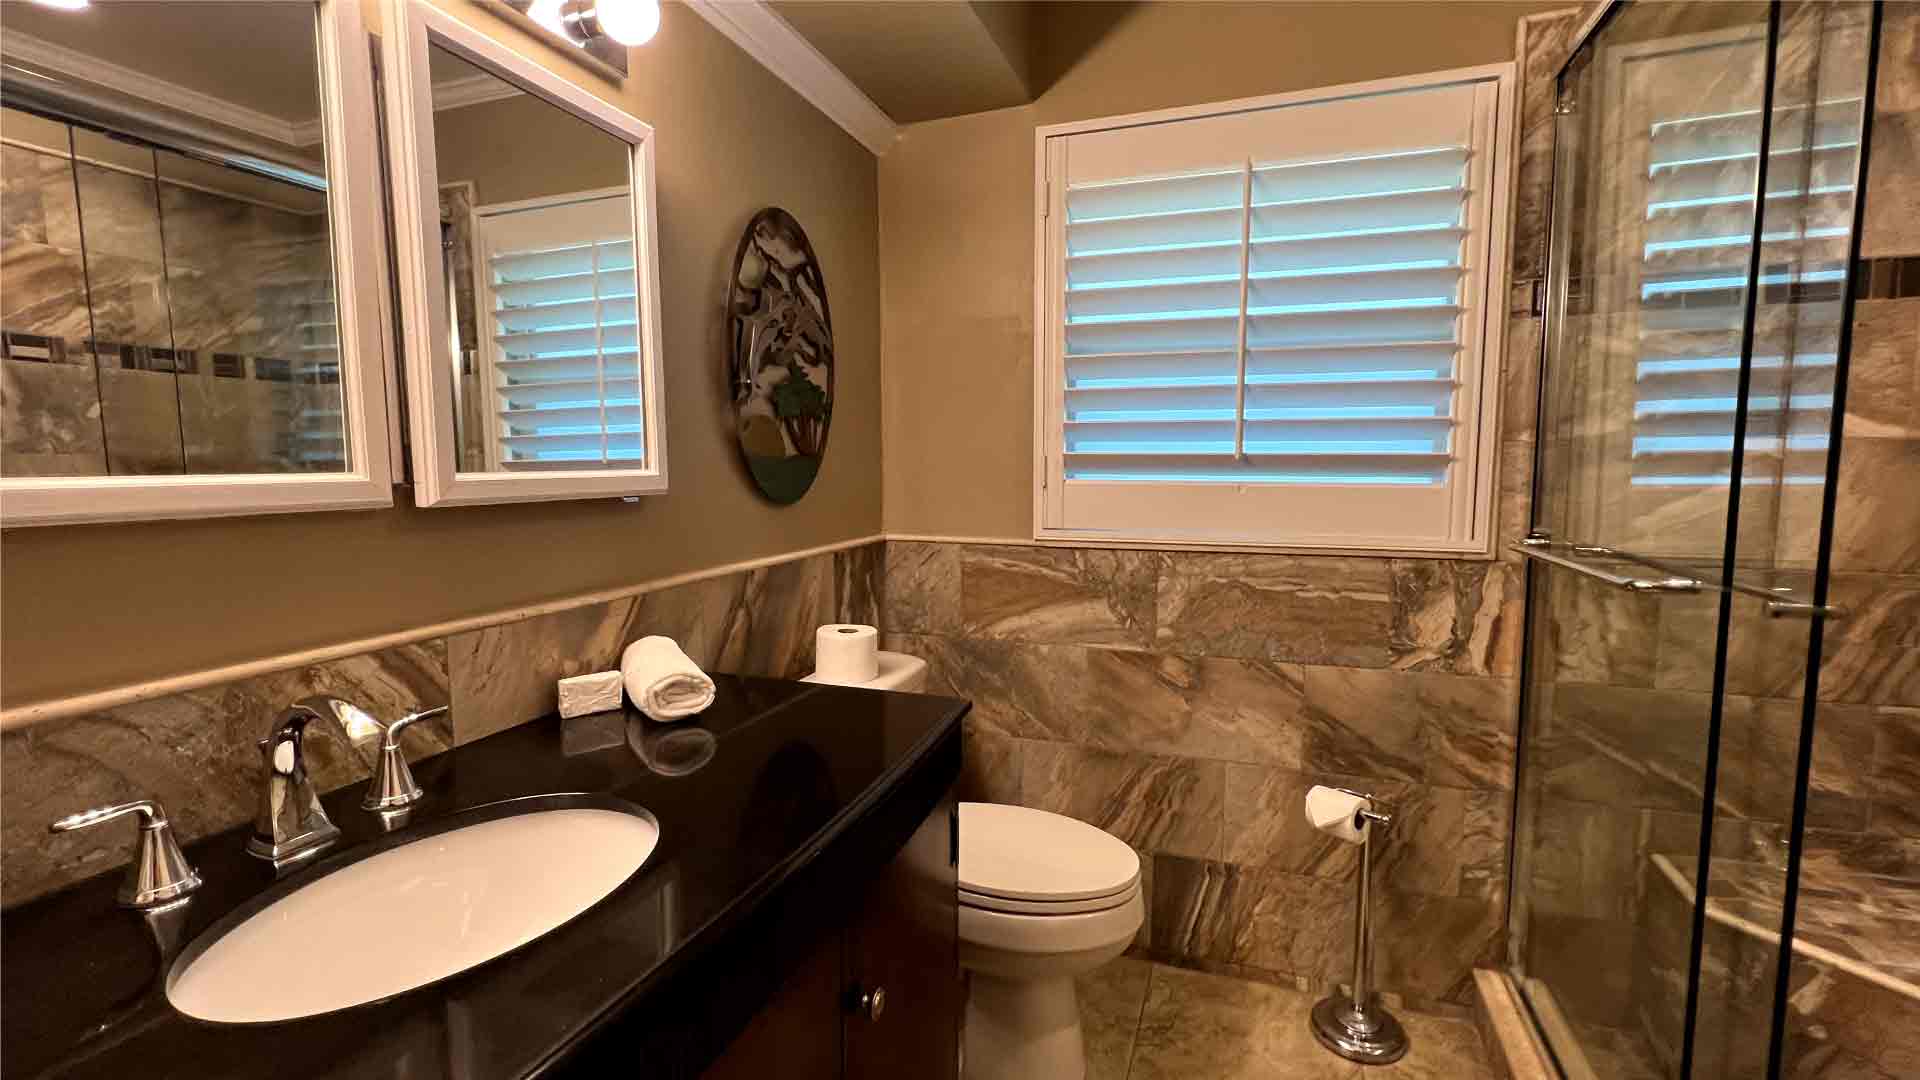 Bathroom - Regular cleaning in Cape Coral by Goldmillio - Apr 12 